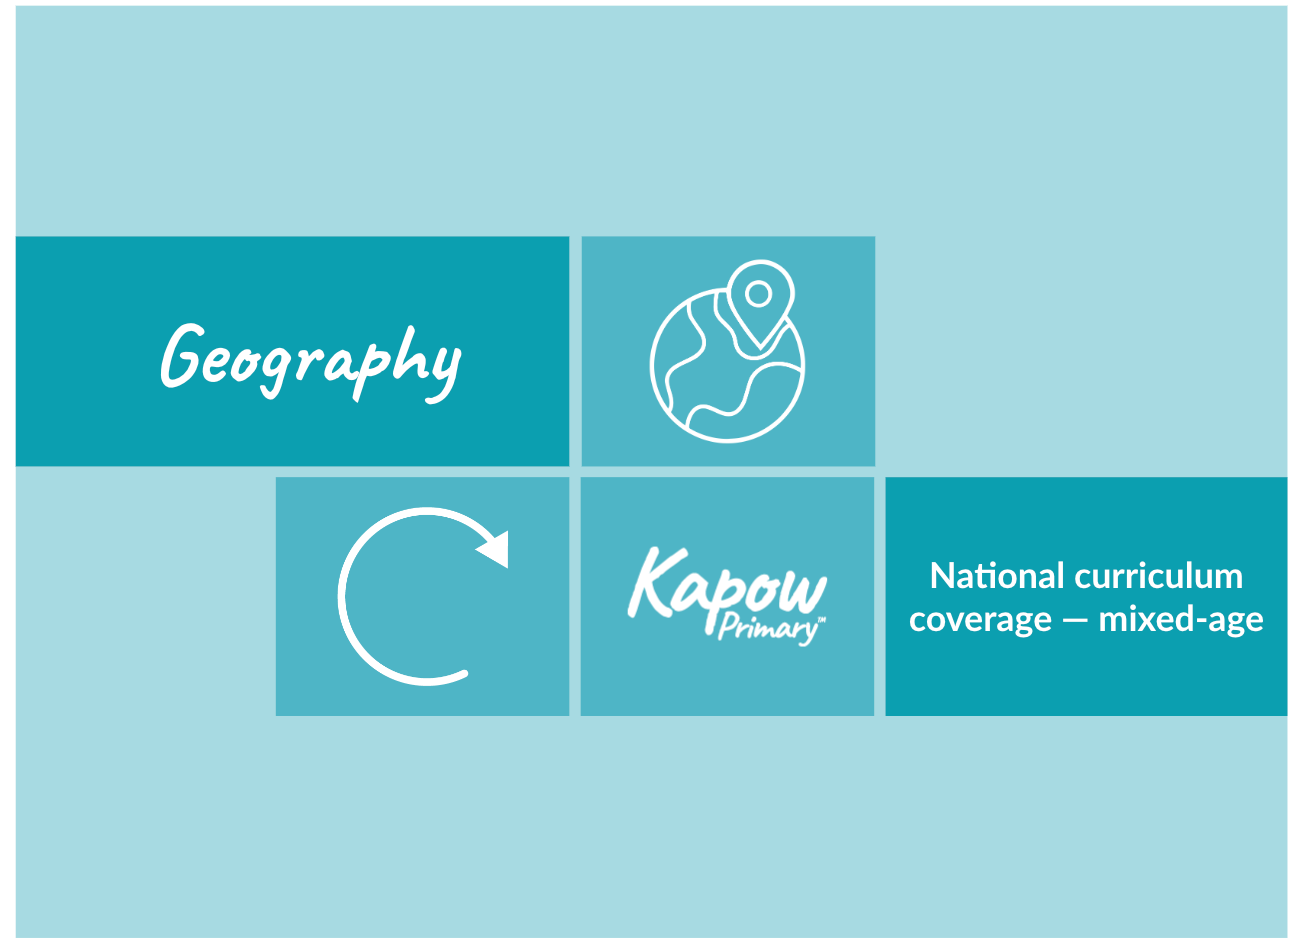 Geography: National curriculum coverage — mixed-age